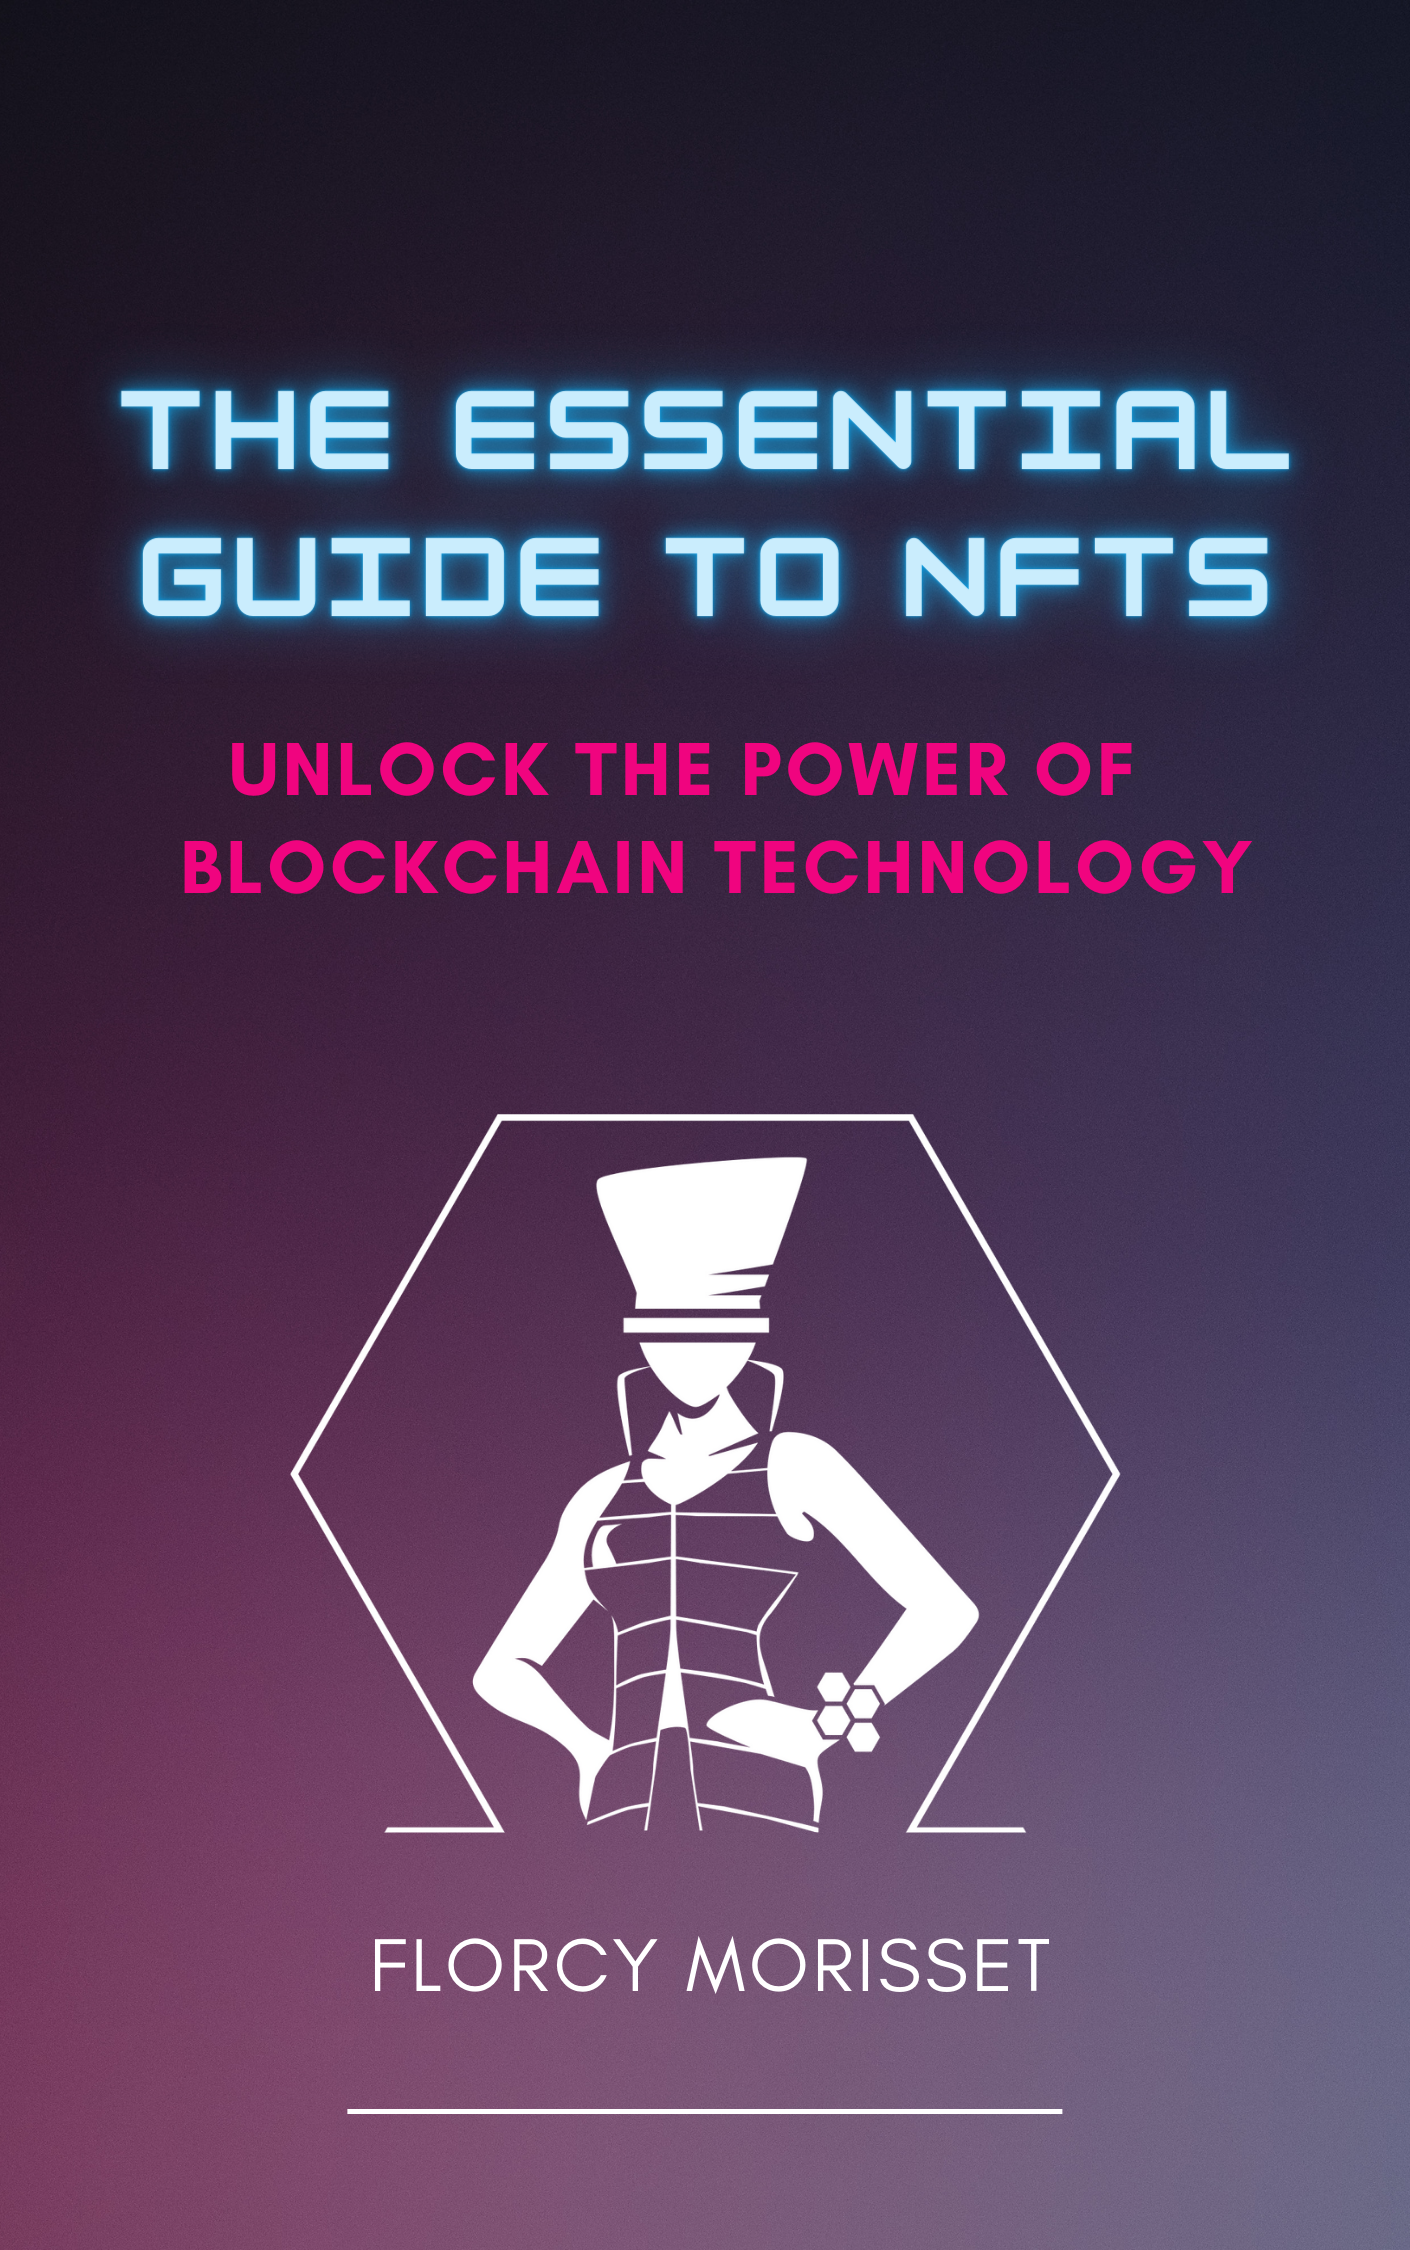 The Essential Guide To NFTs: Unlock The Power of Blockchain Technology